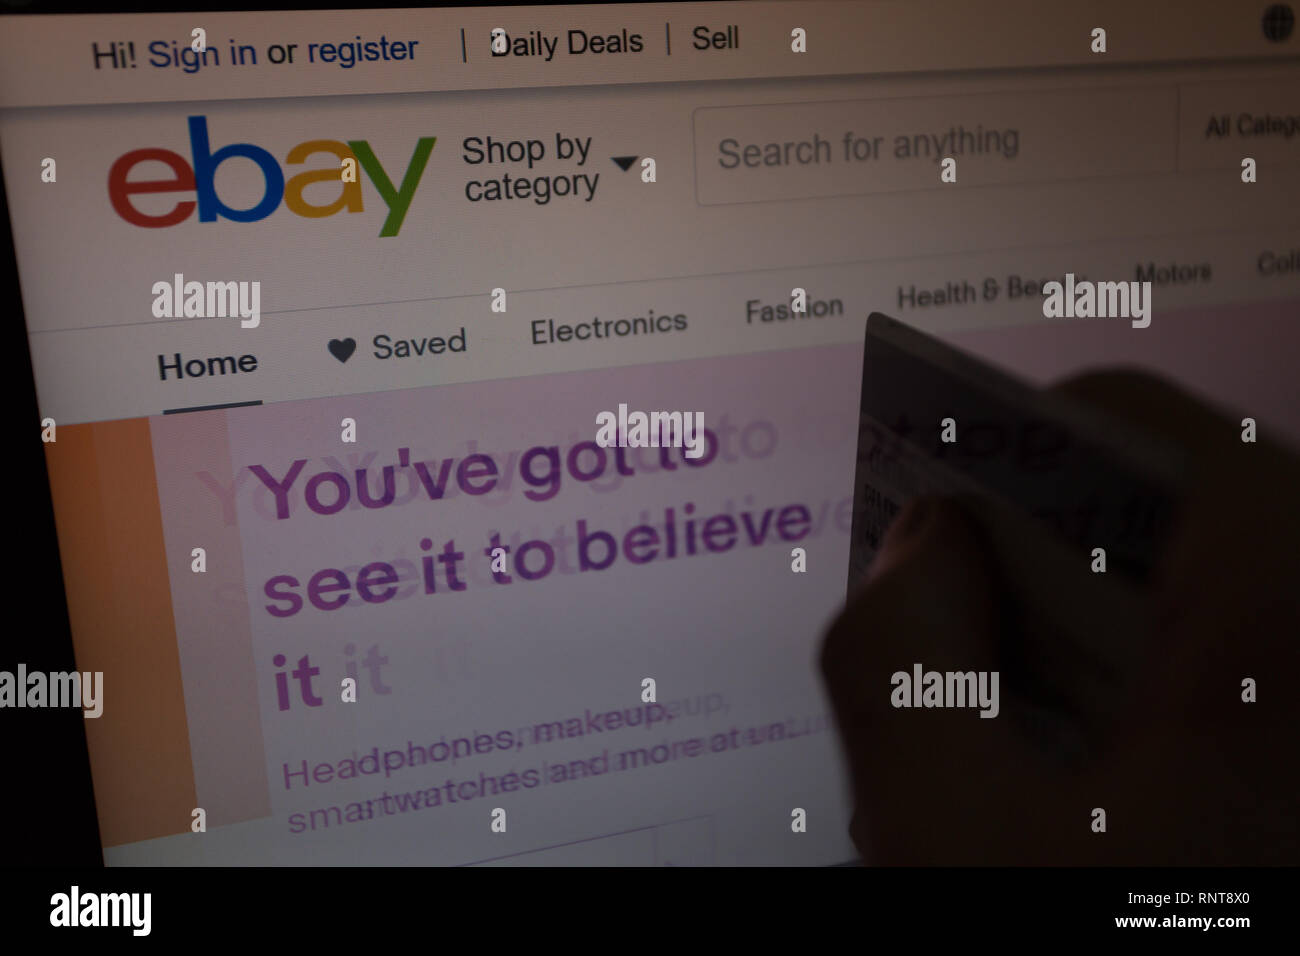 eBay logo on its website is shown on laptop computer screen, hand holding credit debit card unfocused on foreground, online shoppers, purchases Stock Photo